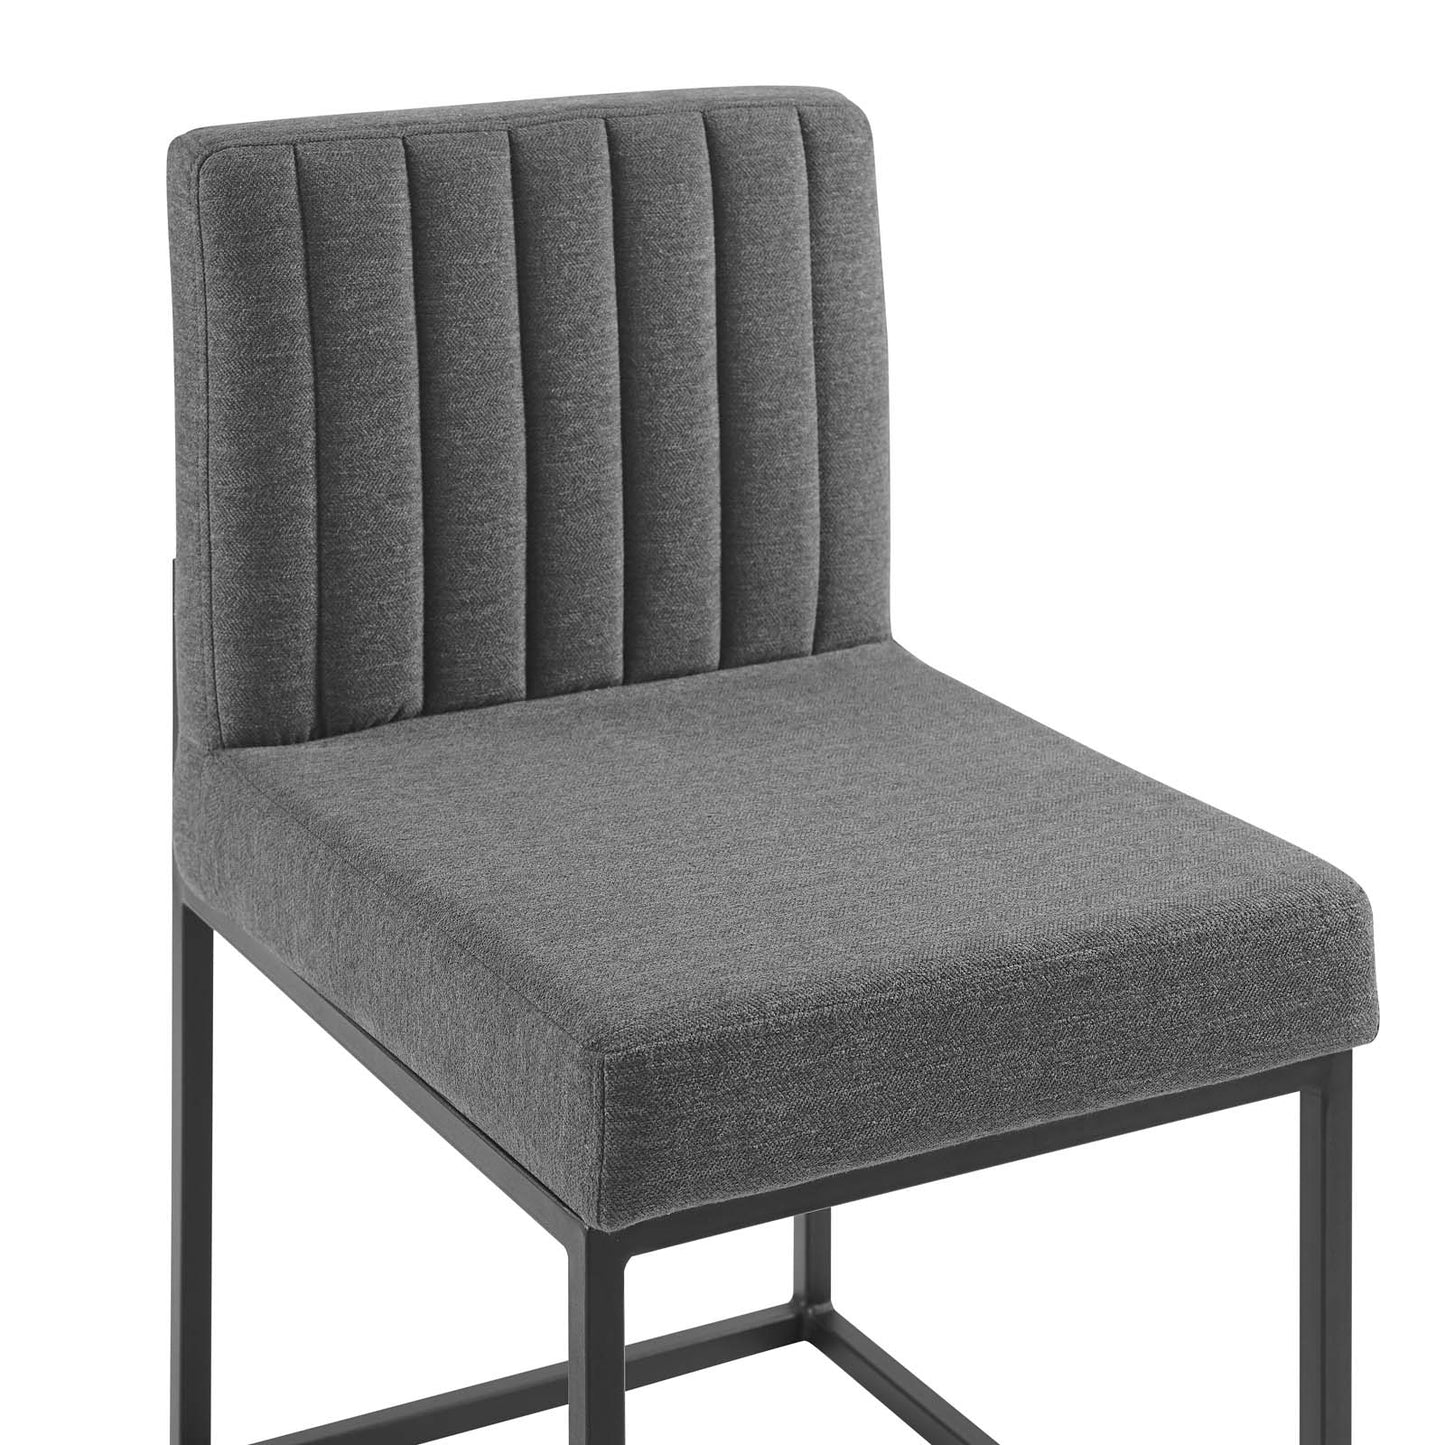 Carriage Channel Tufted Sled Base Upholstered Fabric Dining Chair Black Charcoal EEI-3807-BLK-CHA